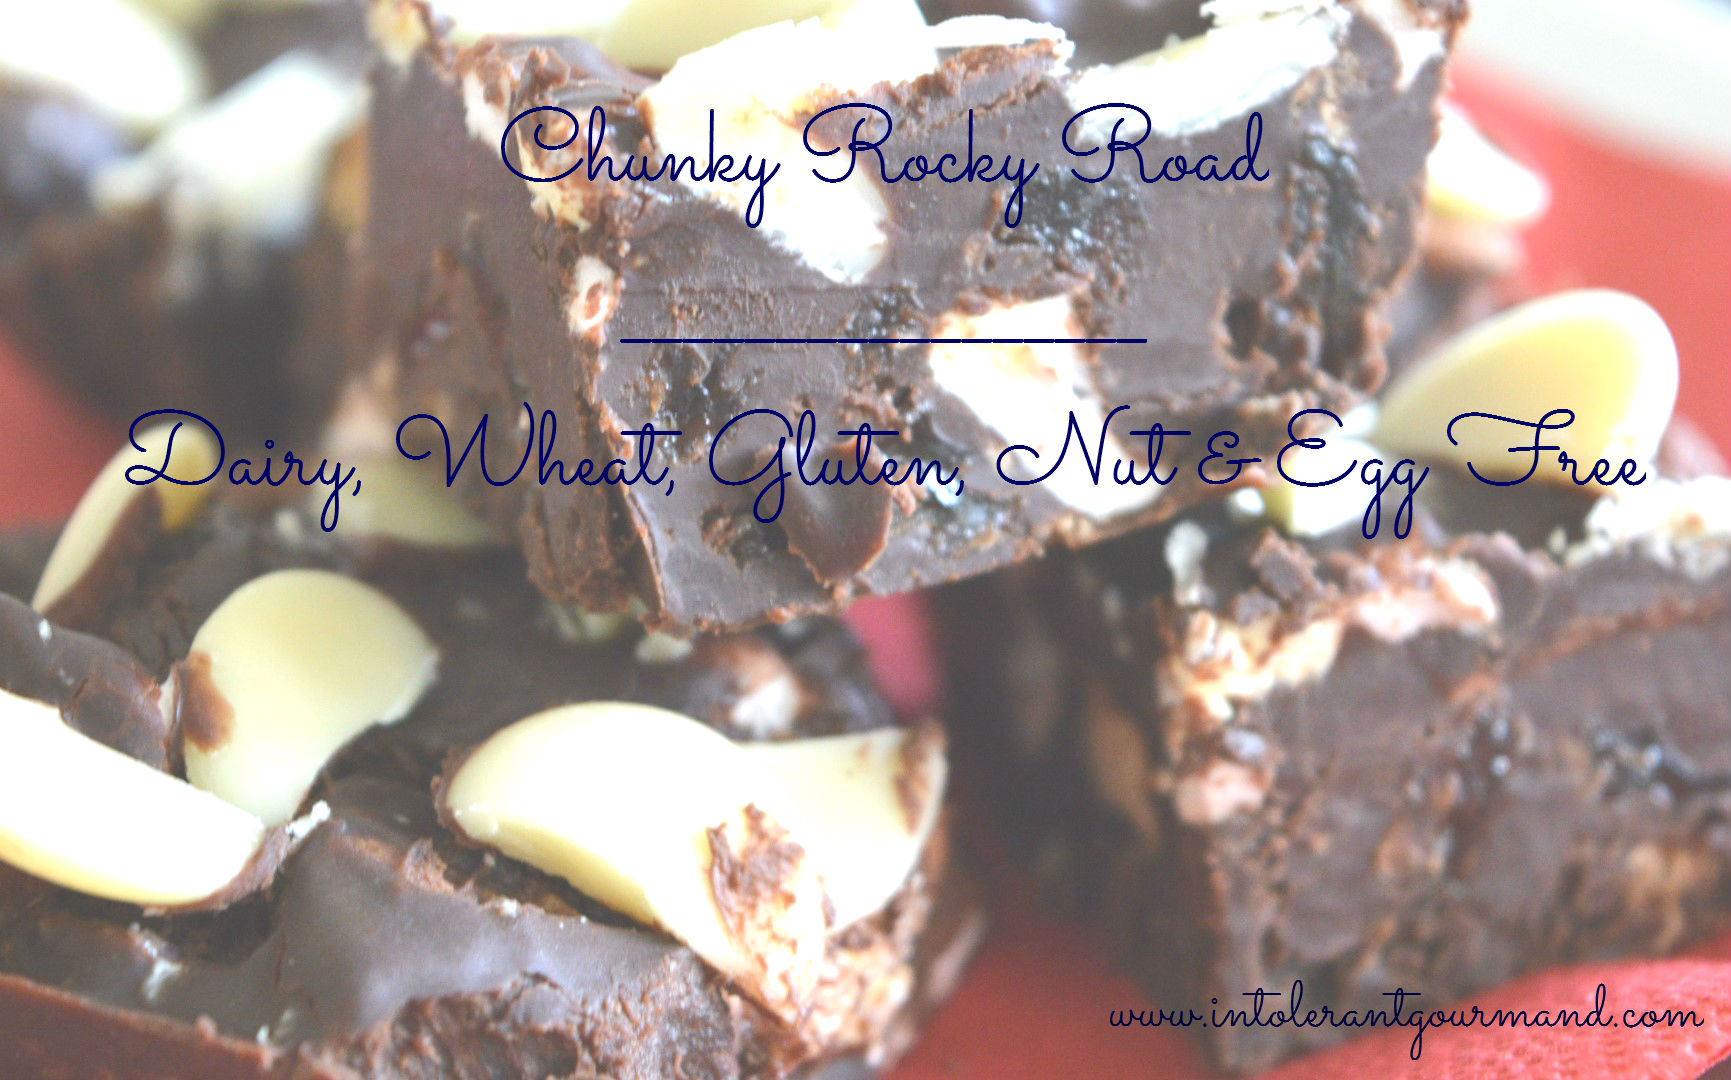 Chunky Free from Rocky Road 